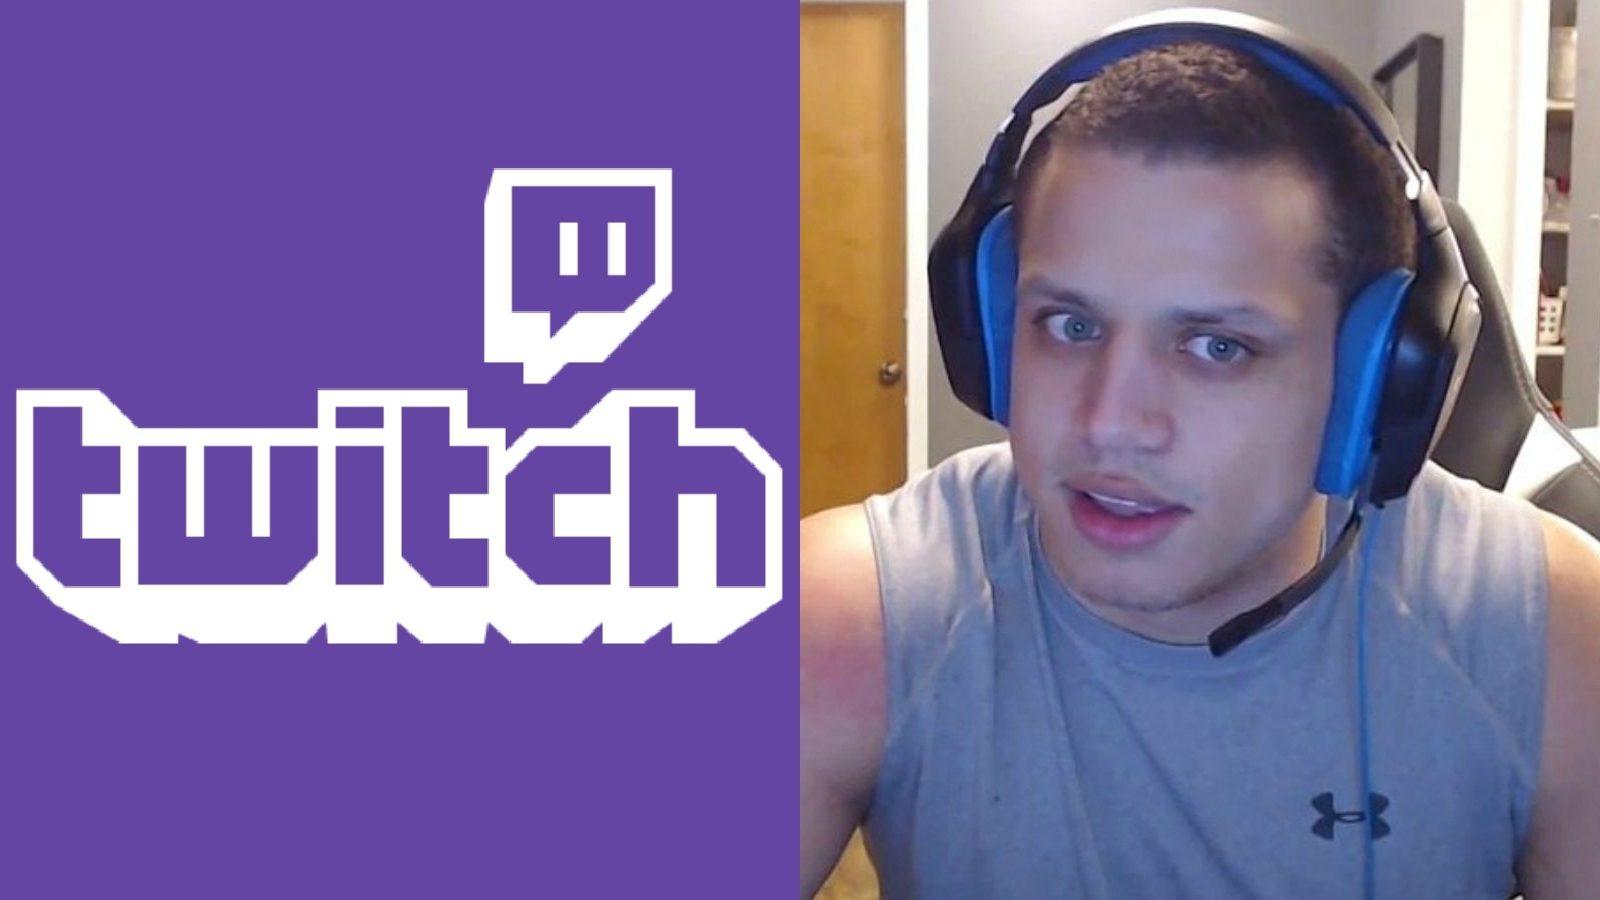 The 10 Funniest League Of Legends Streamers You Have To Watch